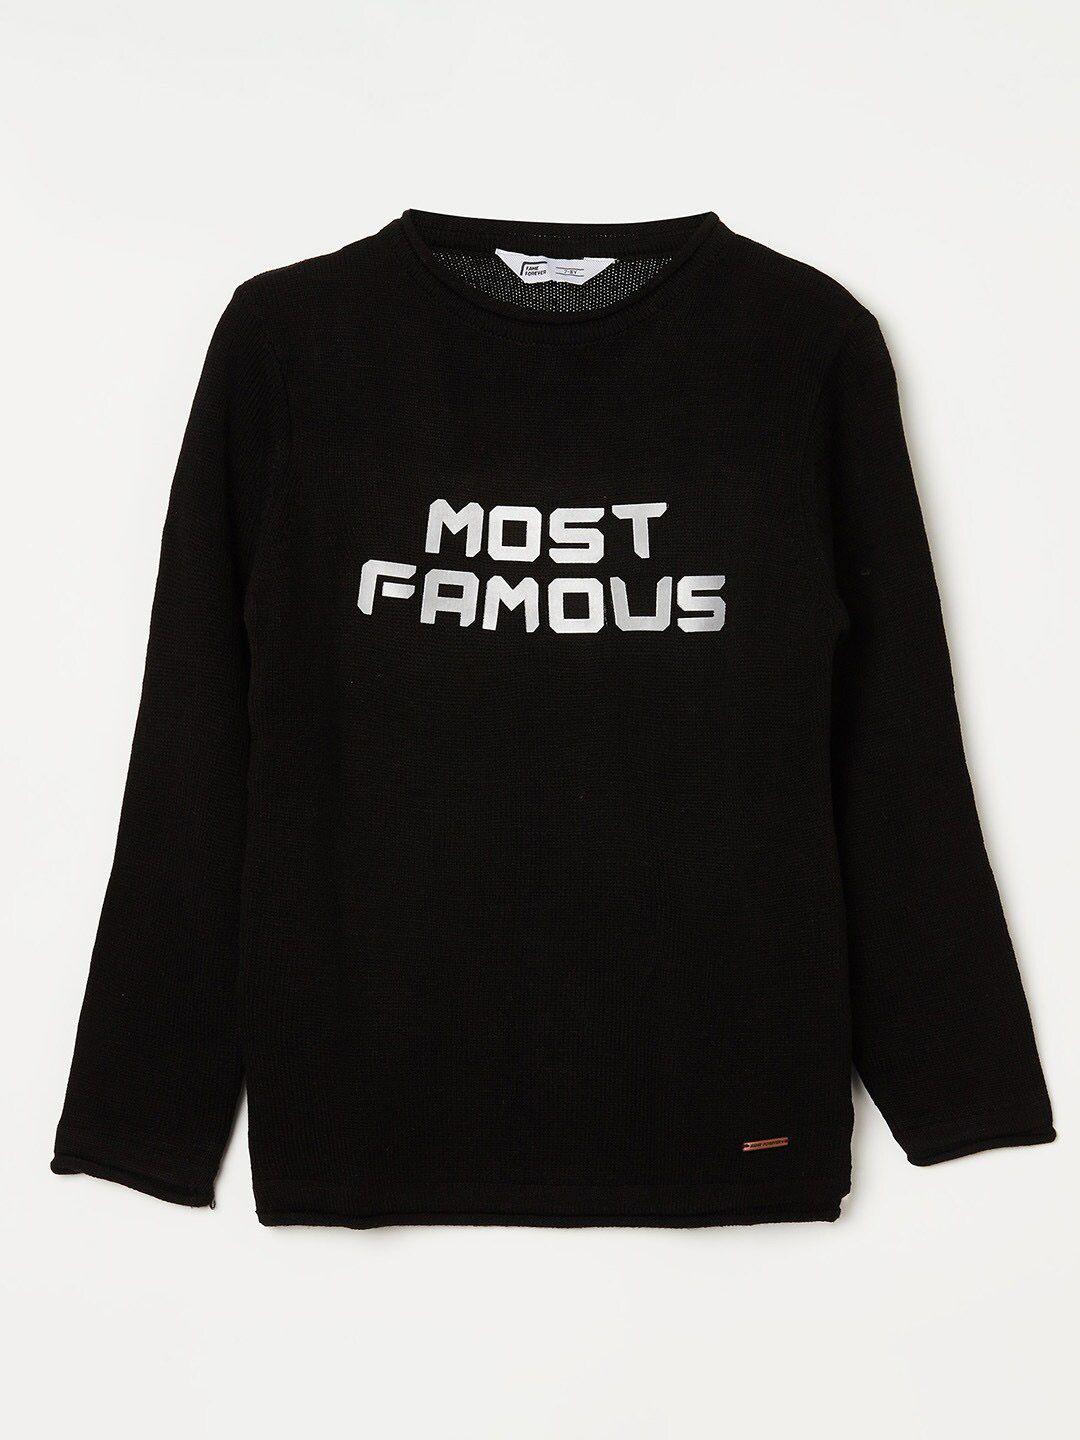 fame forever by lifestyle boys typography printed pullover sweater